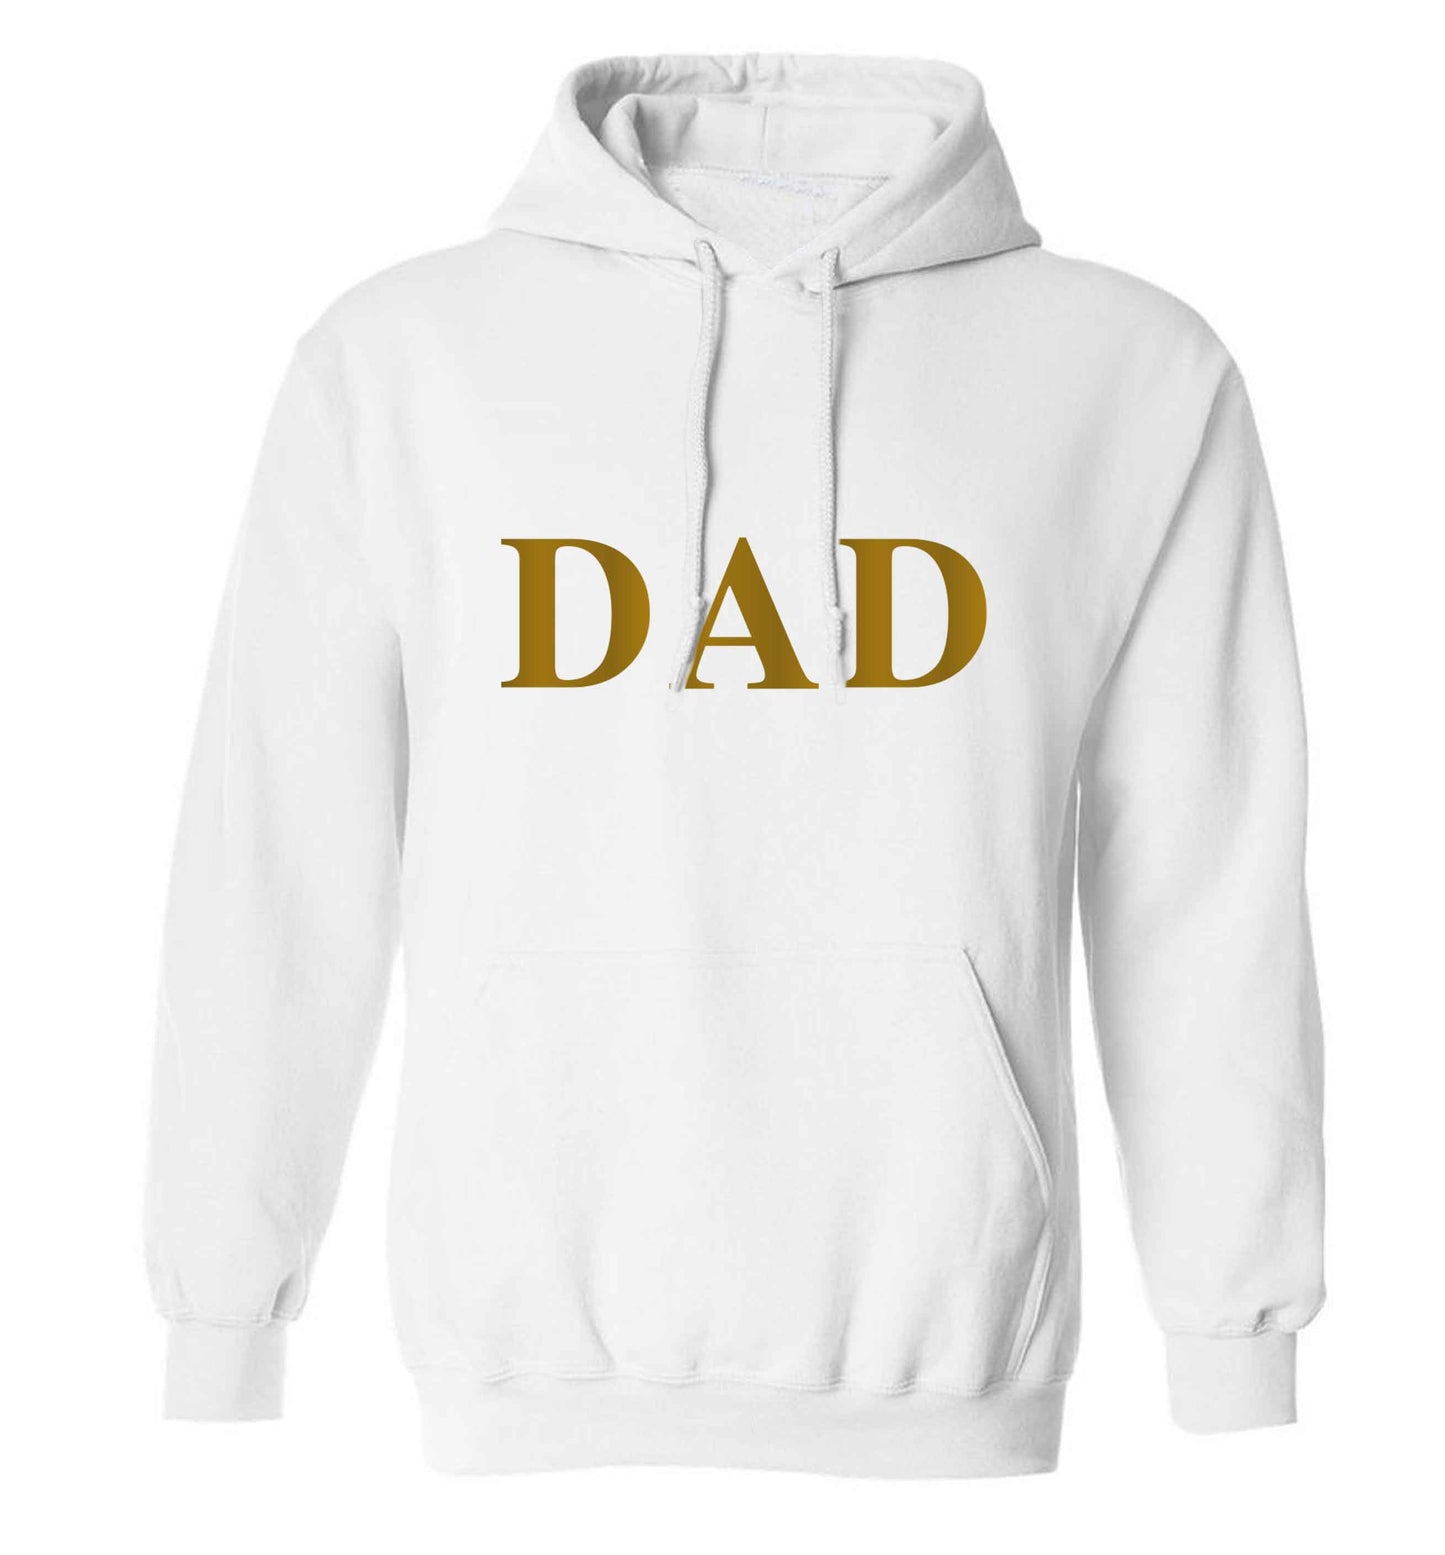 Dad adults unisex white hoodie 2XL